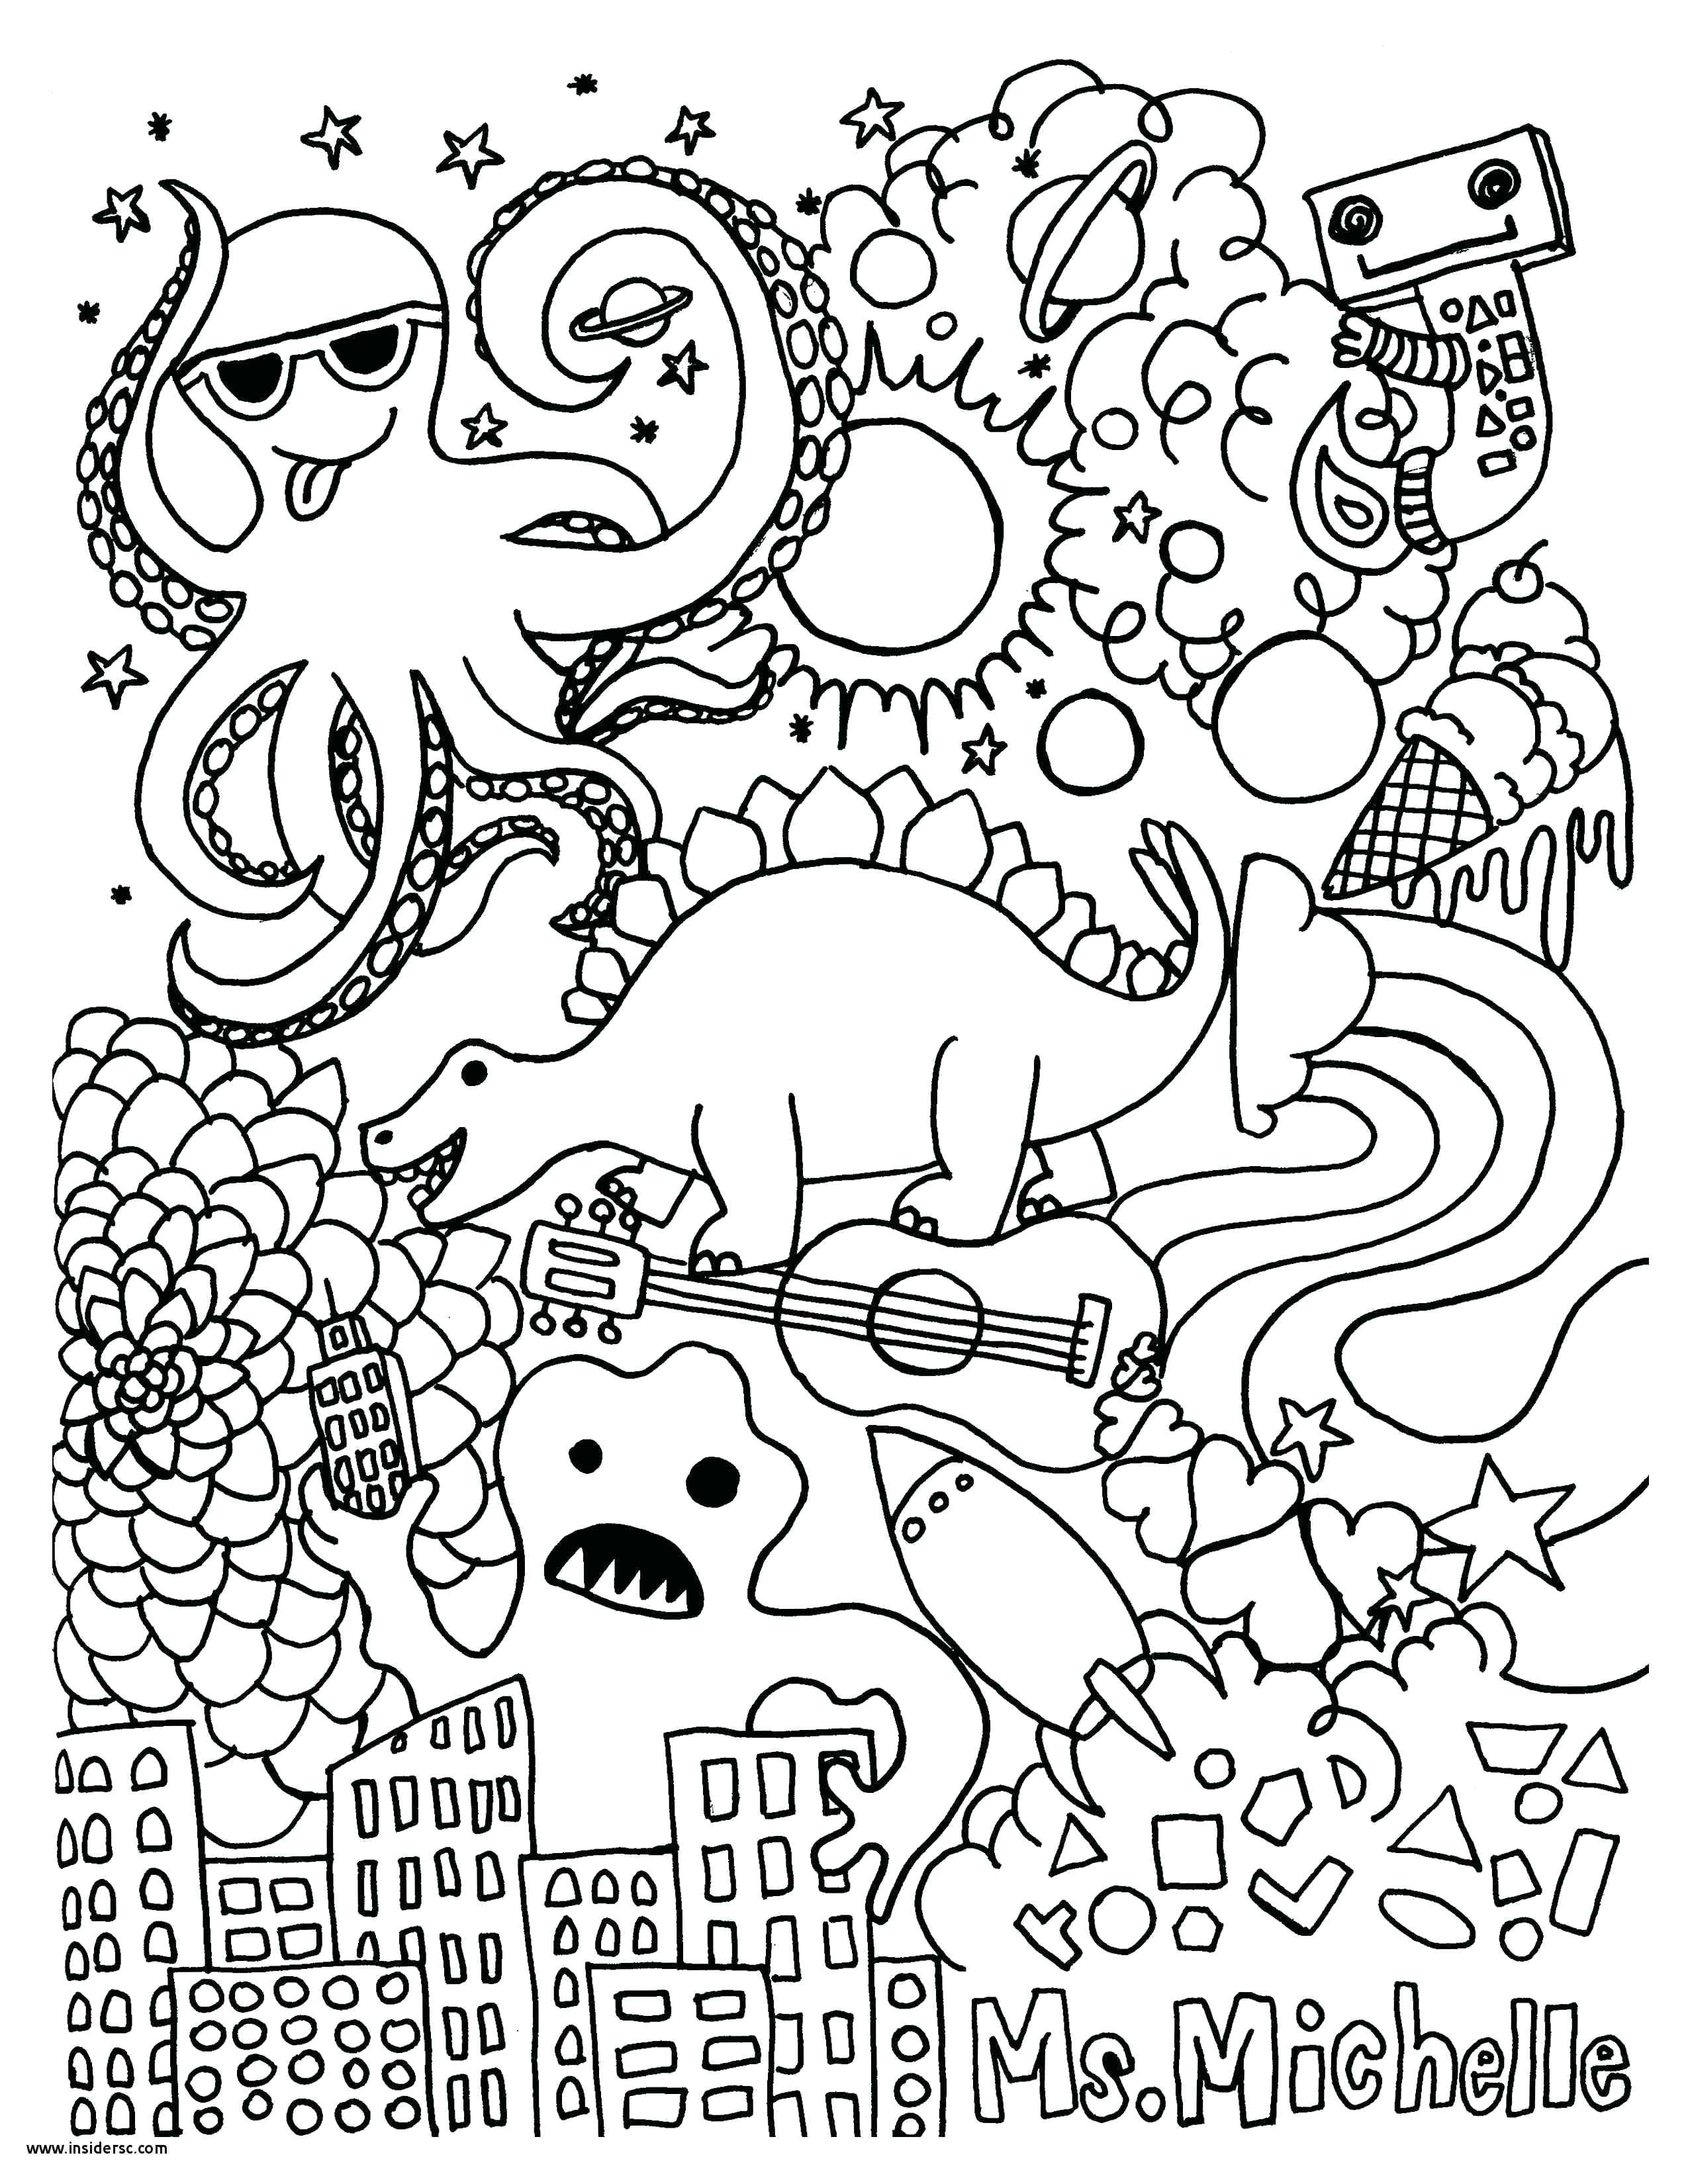 Coloring Pages Autumn Season Coloring Pages Of Fall Season Shieldprintco